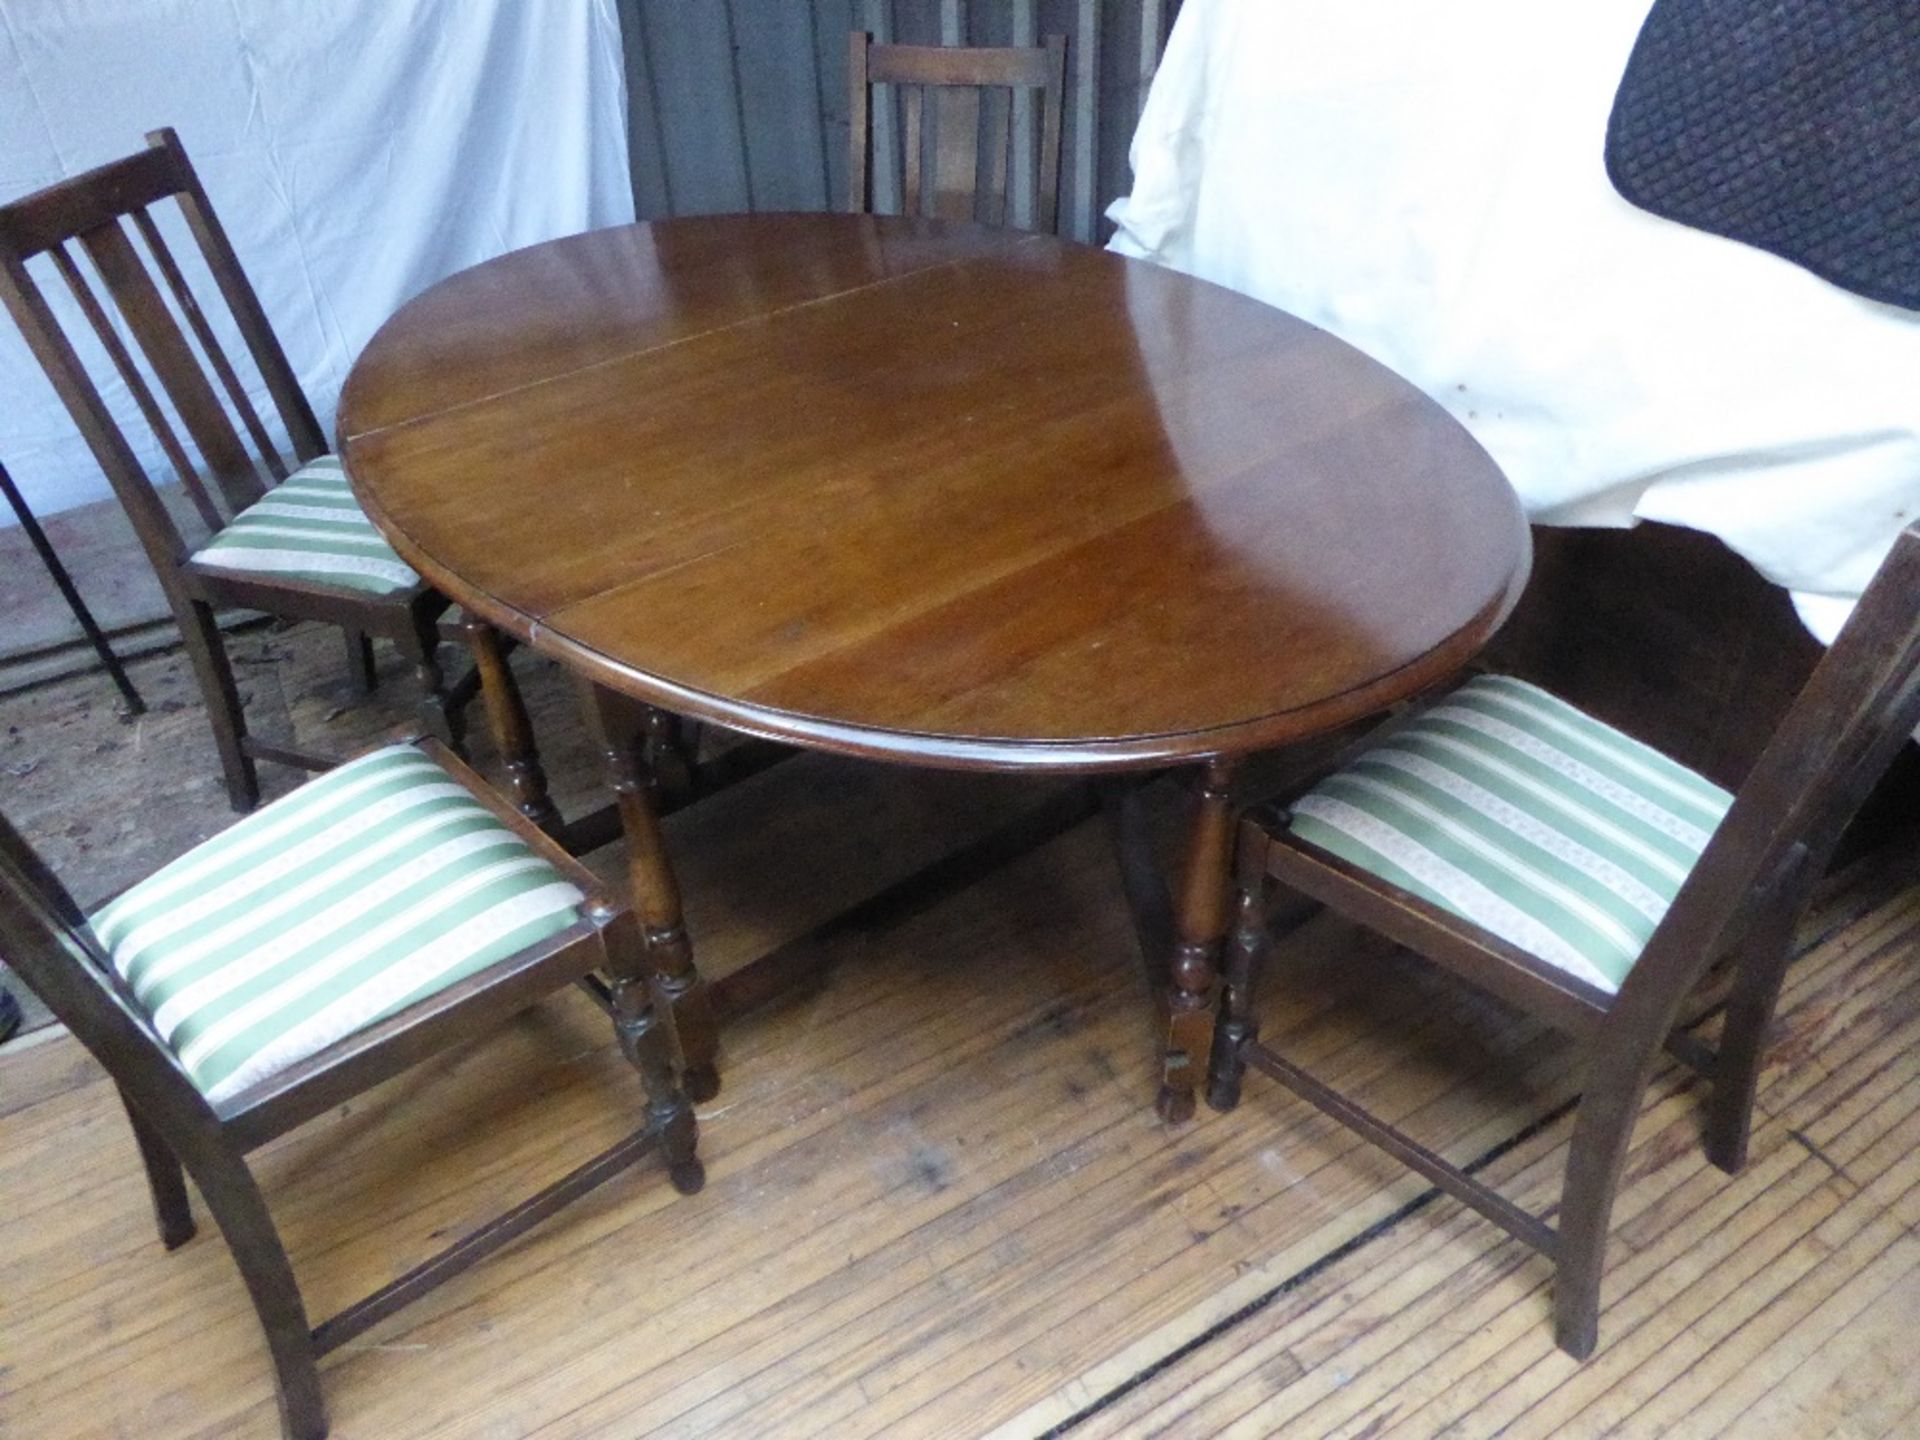 Brown mahogany gate leg table with four chairs upholstered in green striped material